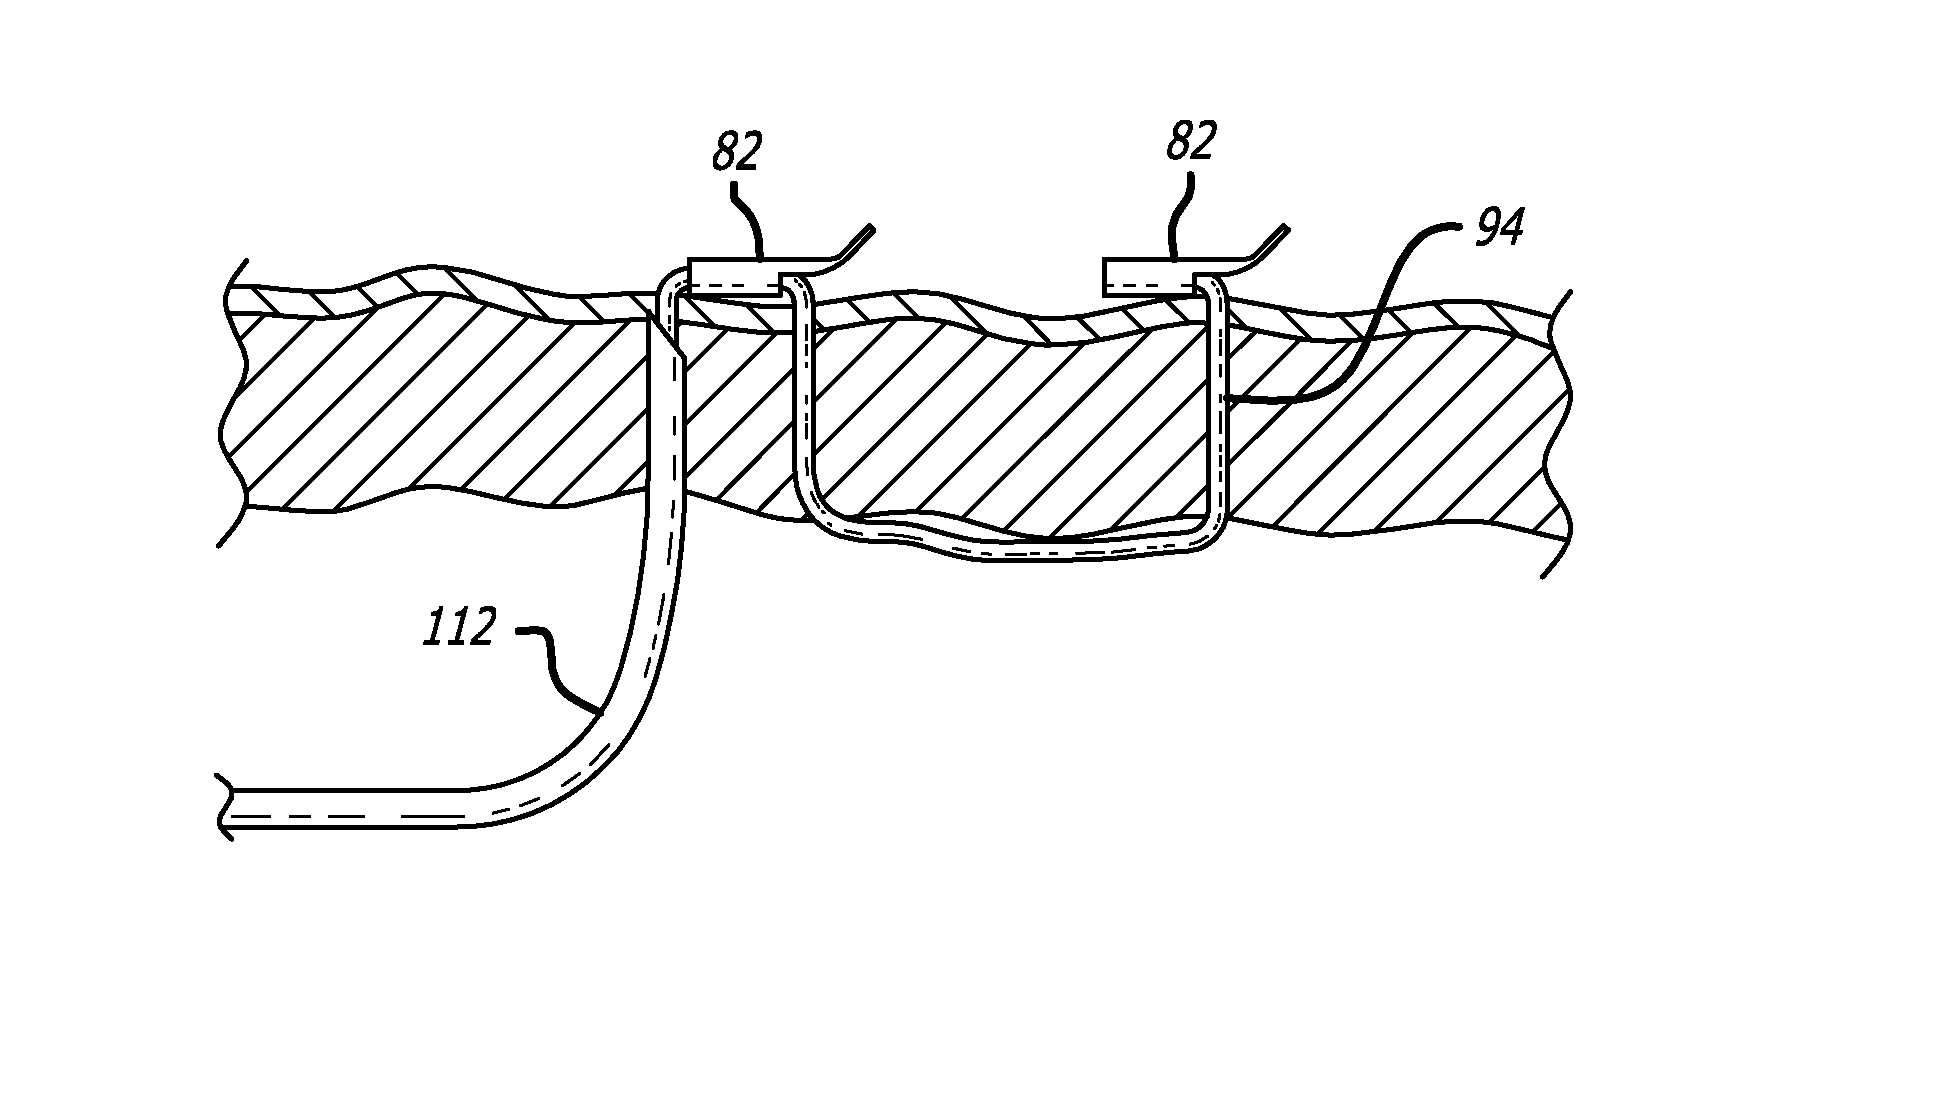 Apparatus and method for manipulating or retracting tissue and anatomical structure